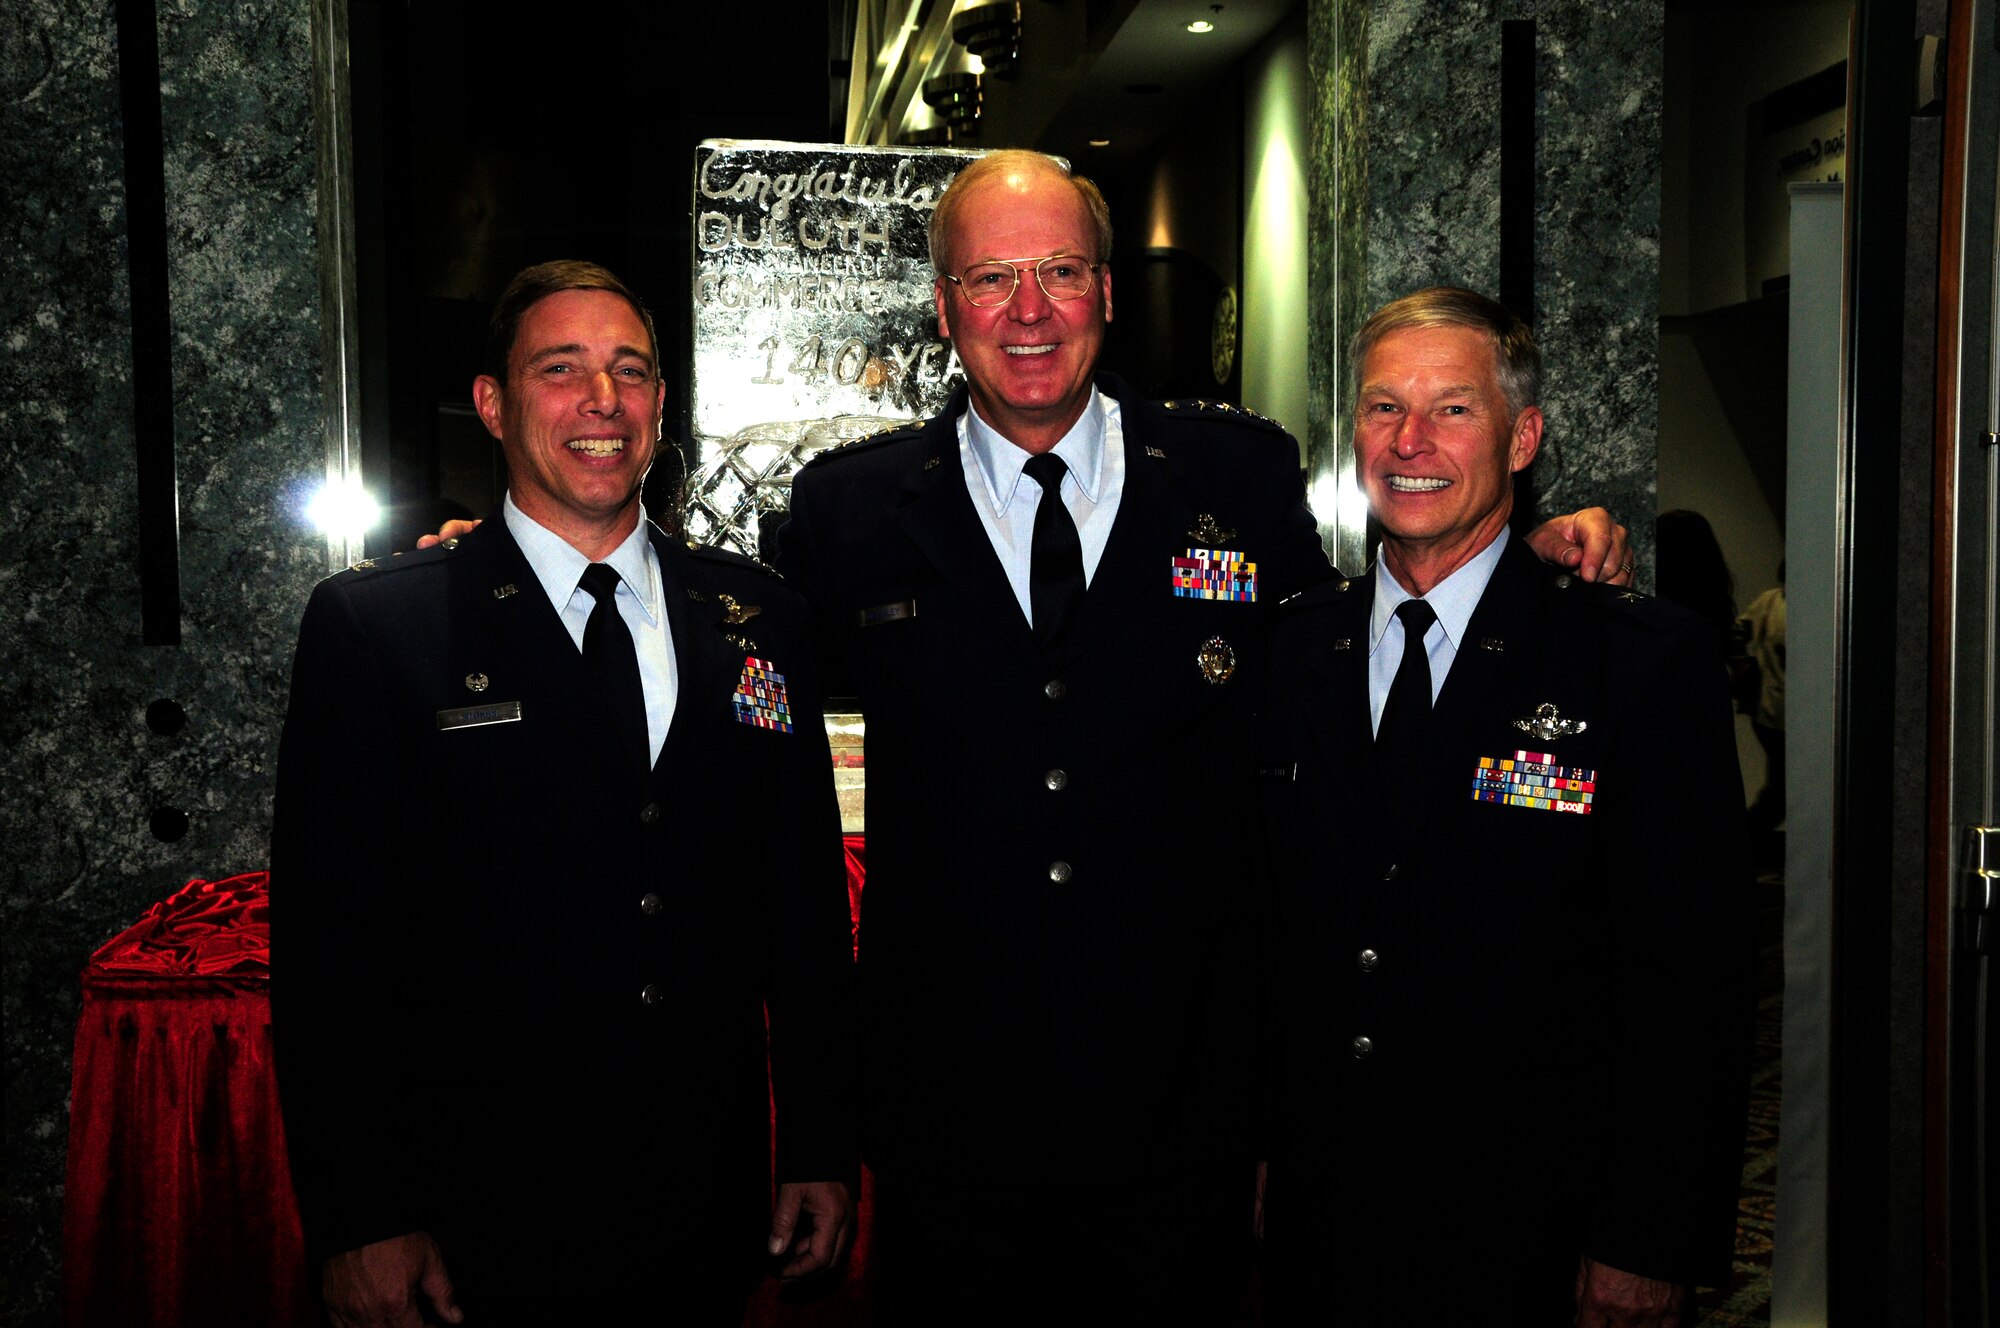 General Craig McKinley, chief of the National Guard Bureau, poses for a photo with former 148th Fighter Wing Commander and current Assistant Adjutant General - Air, Bridagadier Gen. Timothy Cossalter, and current 148th FW Commander, Colonel Frank Stokes at the annual Chamber of Commerce Dinner and Gala held on Oct. 21, 2010 at the Duluth Entertainment and Convention Center in Duluth, Minn.  Gen. McKinley was the keynote speaker for the event and spoke highly of 148th accomplishments and the communities' positive support of military members.    (U.S. Air Force photo by MSgt Ralph Kapustka)